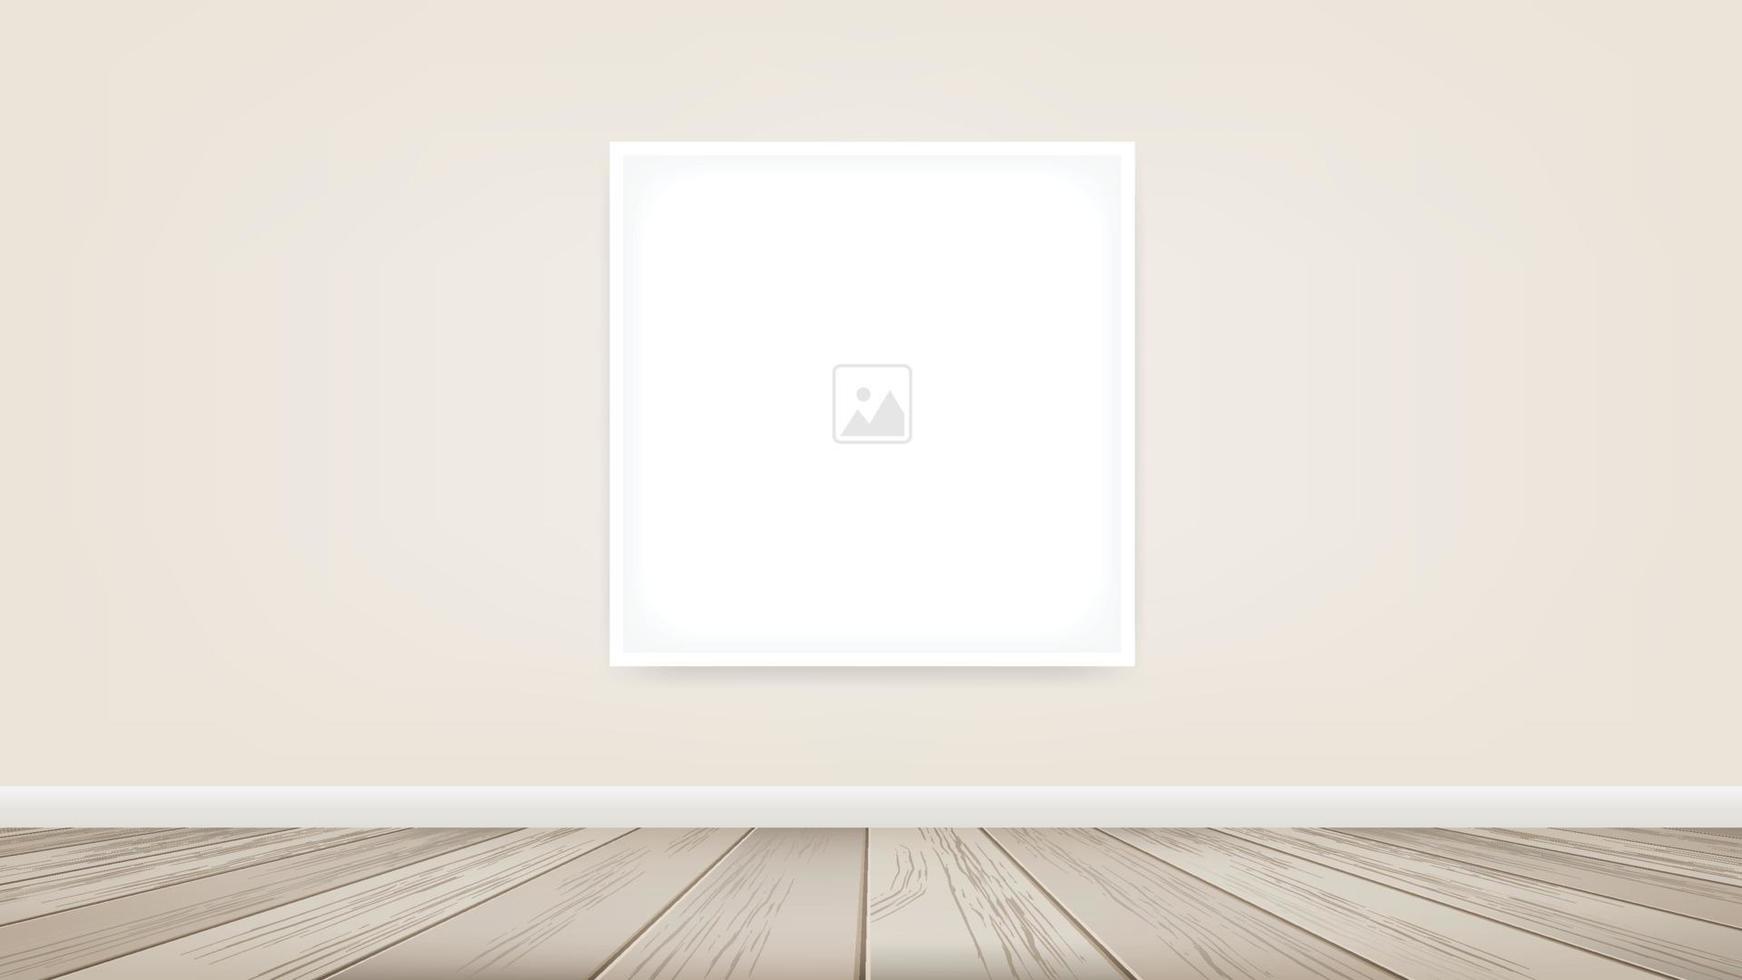 Empty photo frame or picture frame background in wooden room space background. For room design and interior decoration. Vector. vector